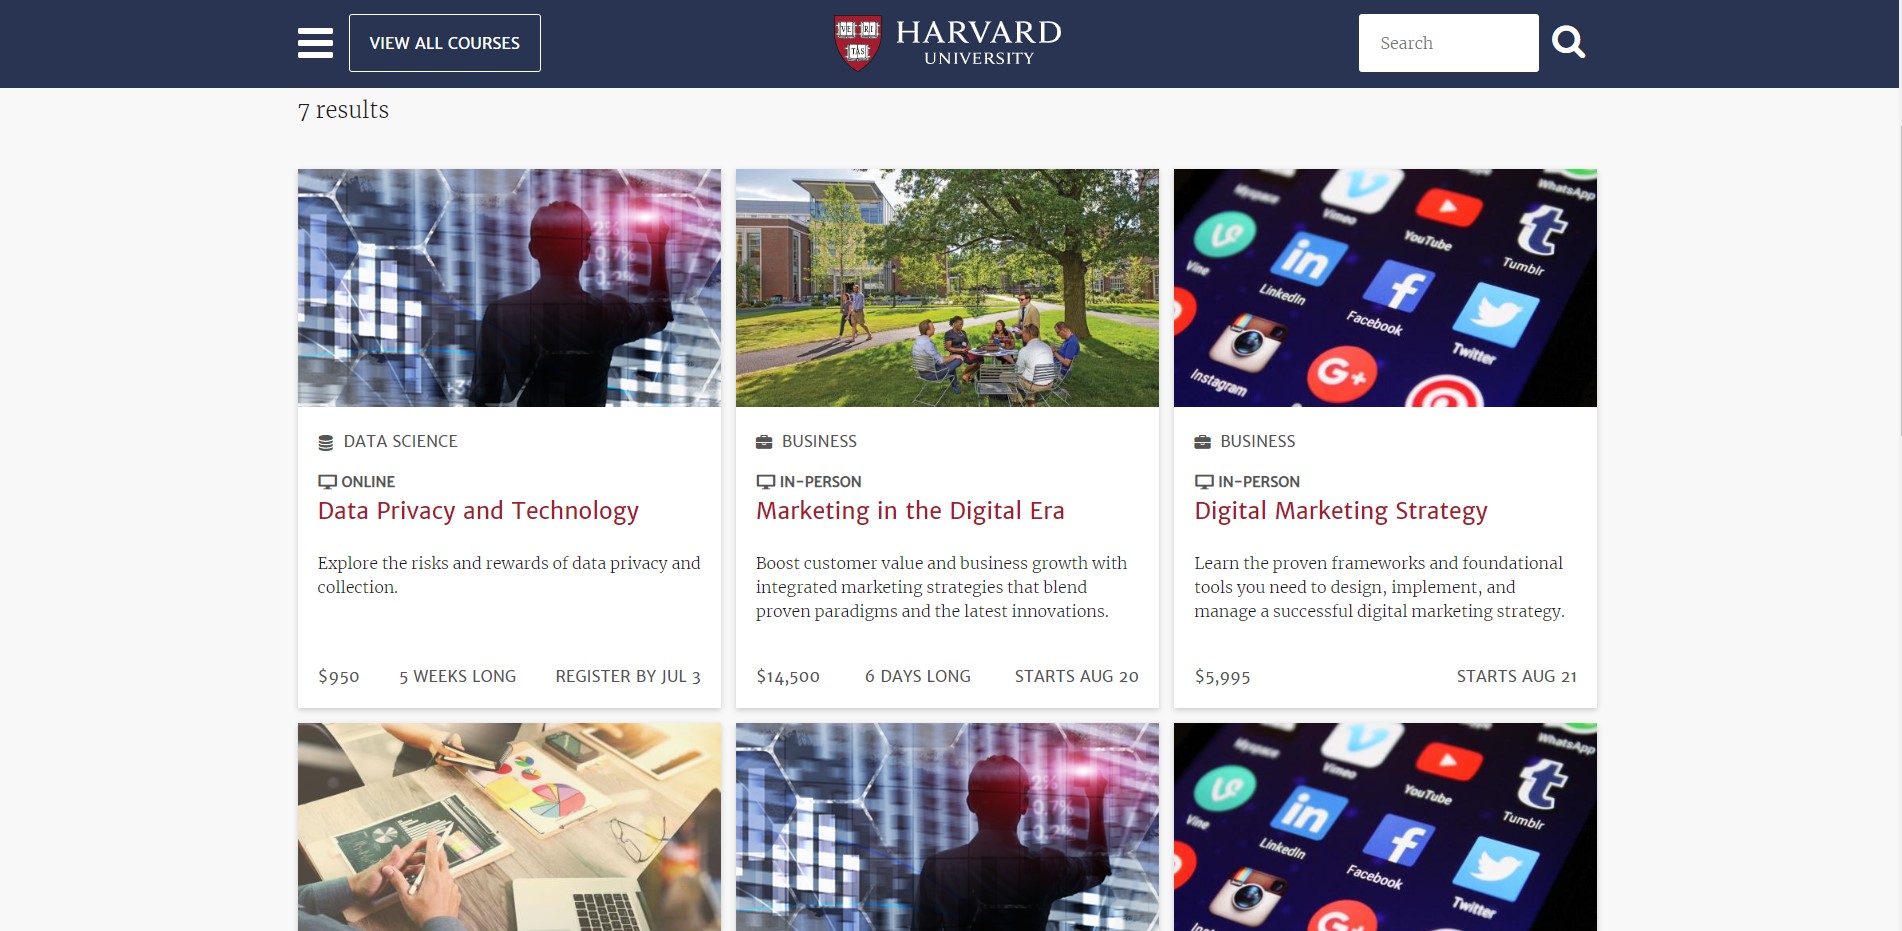 Harvard provides one of the best digital marketing courses